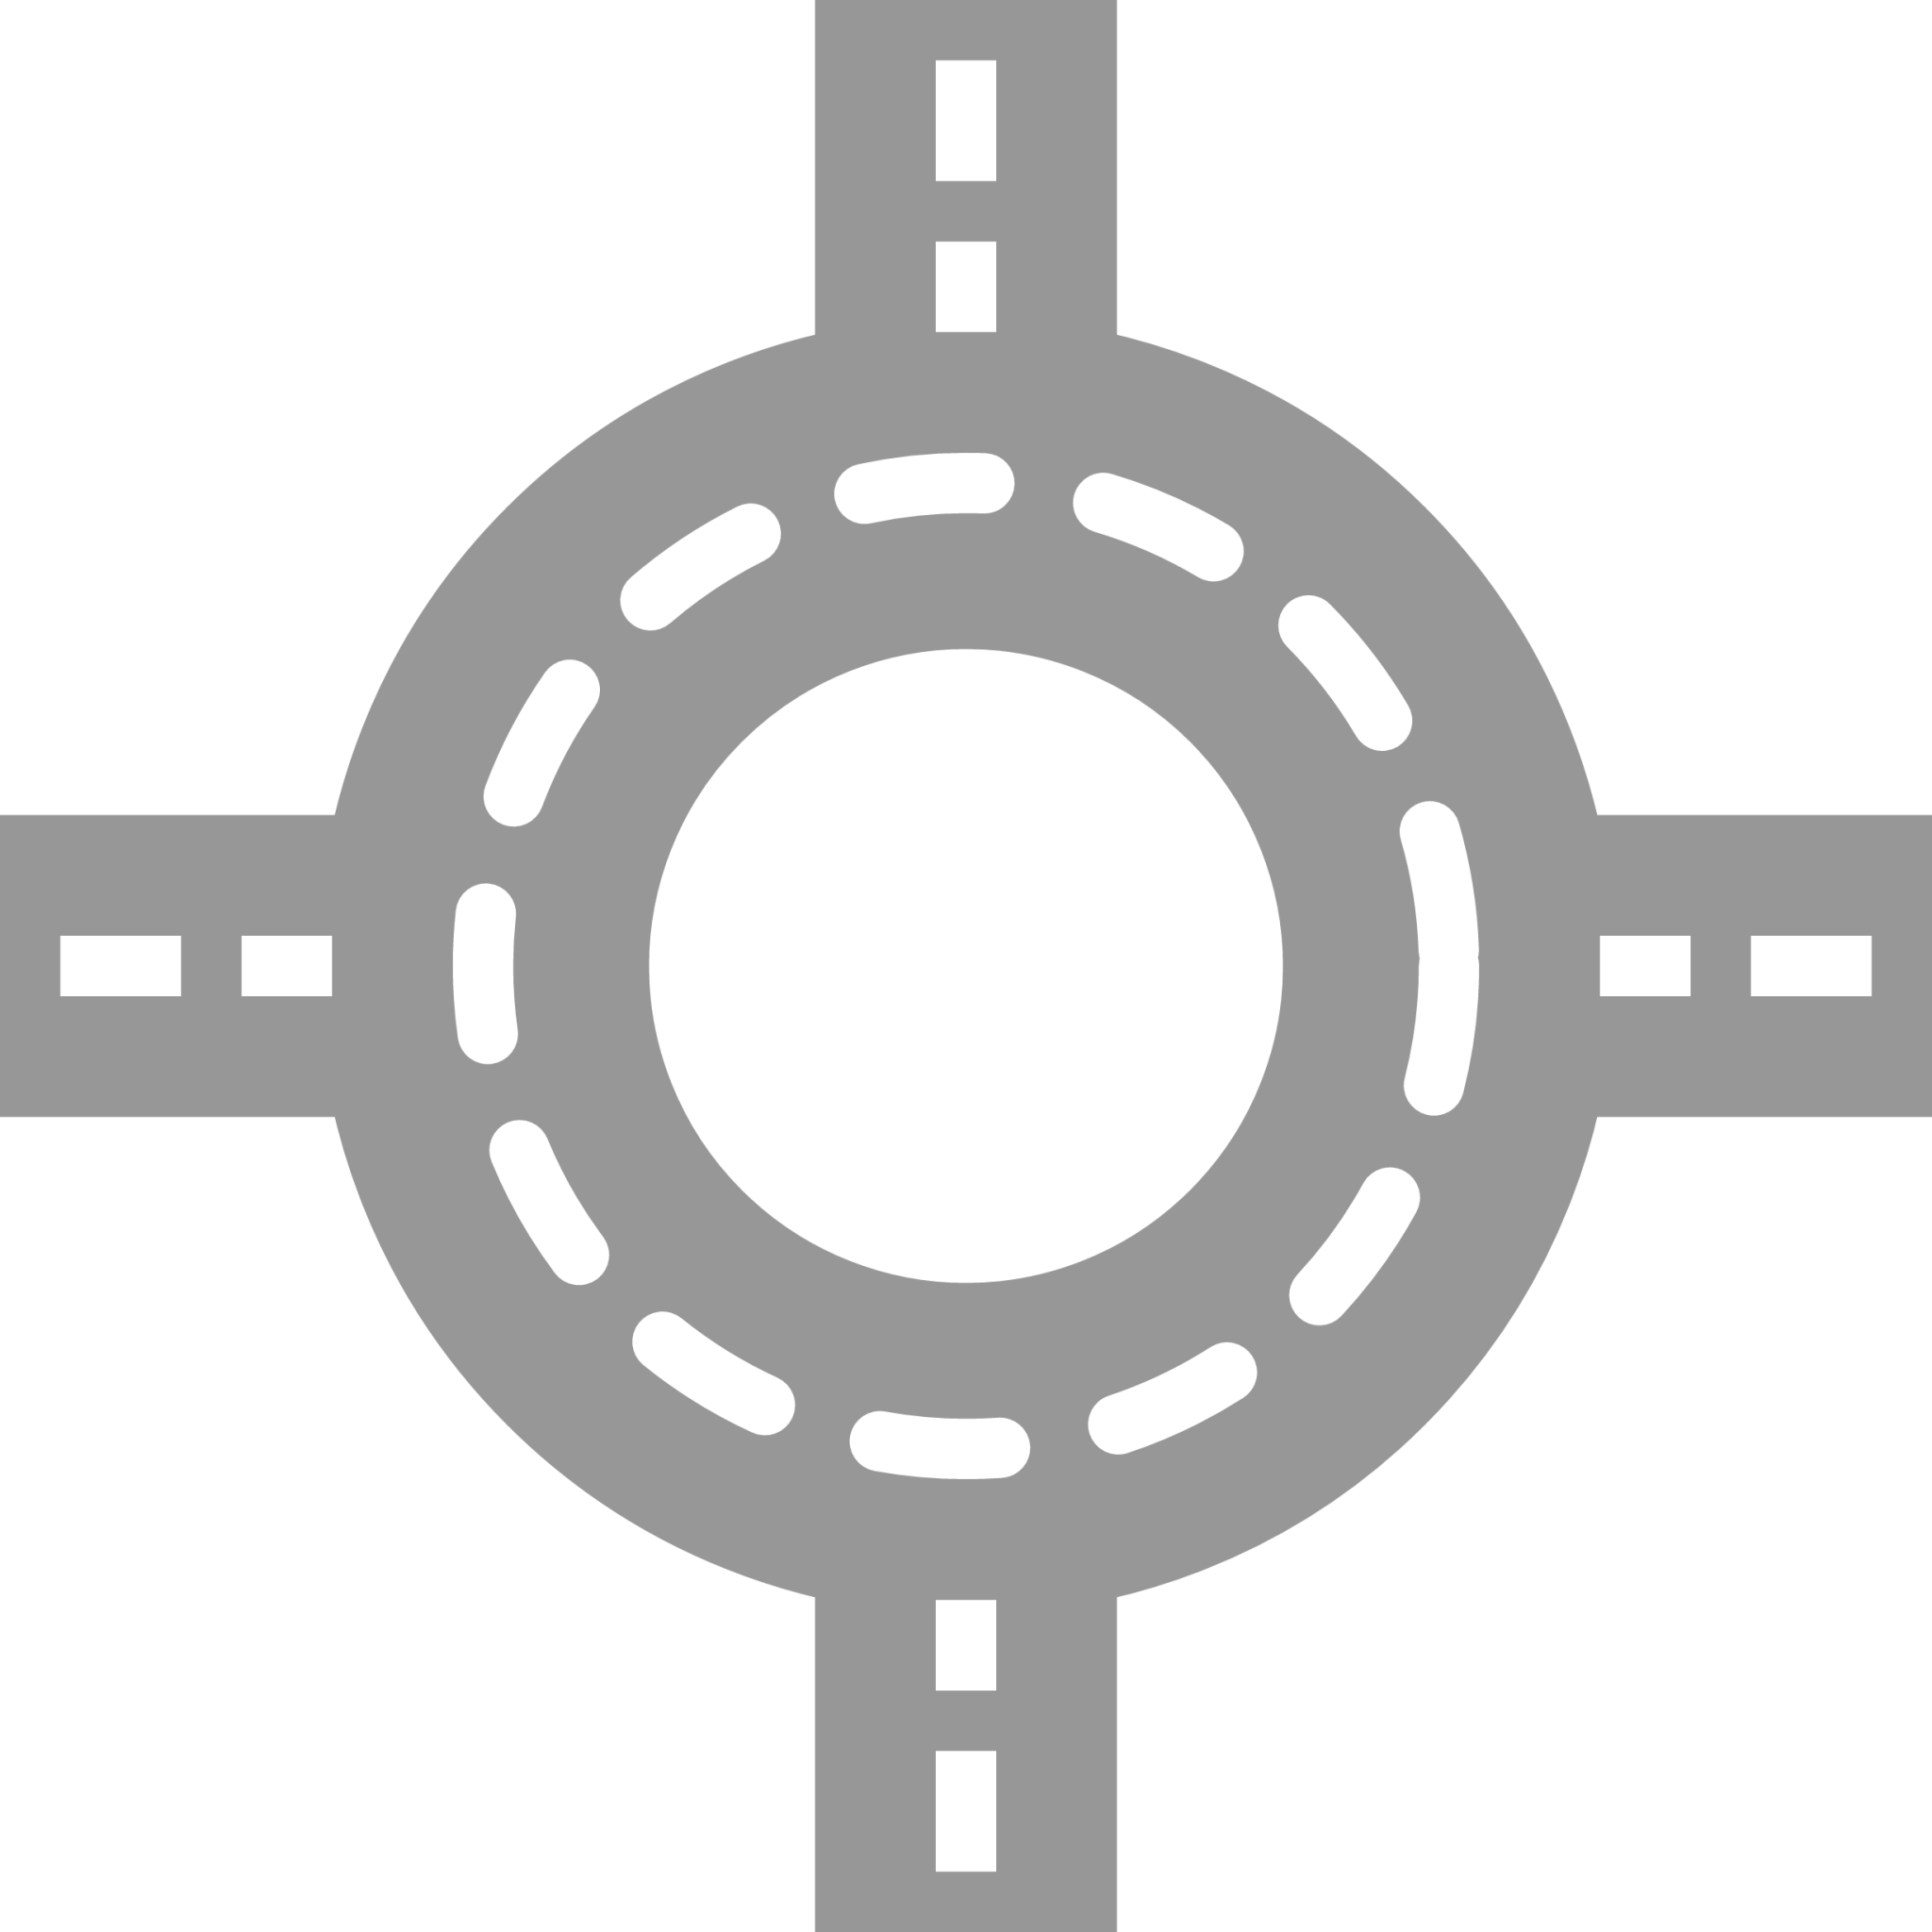 round intersection icon